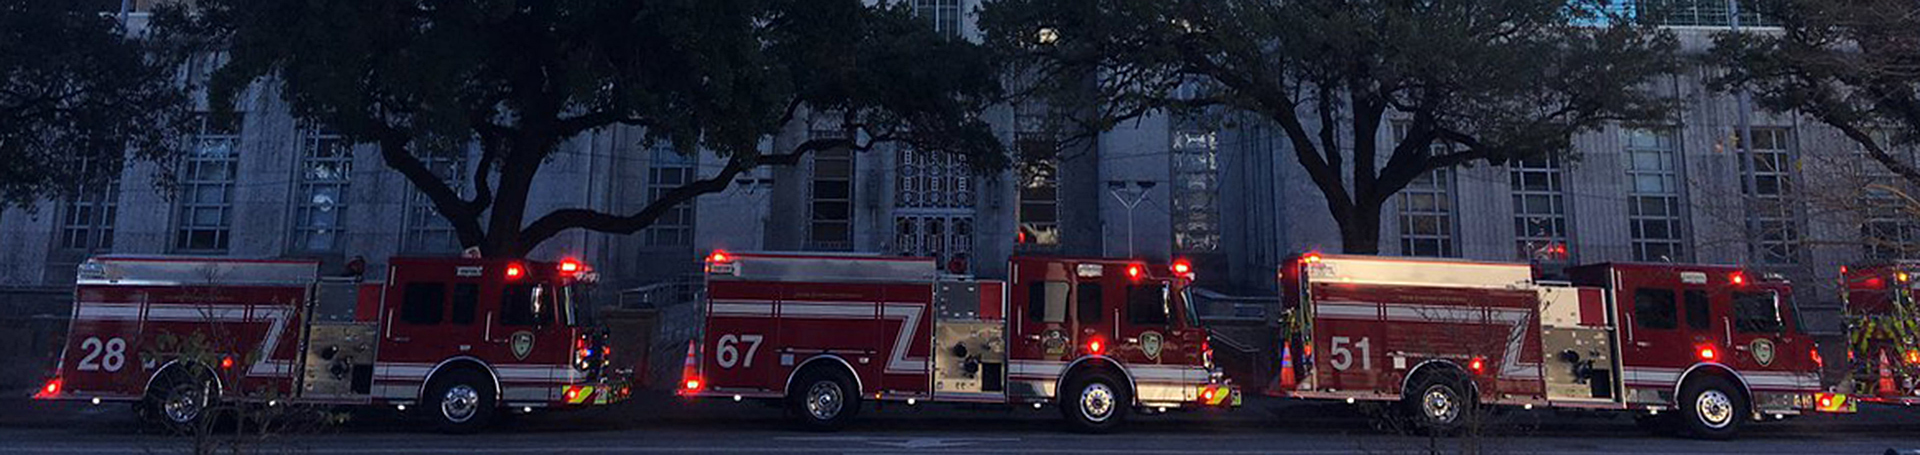 Fire Engines at City Hall